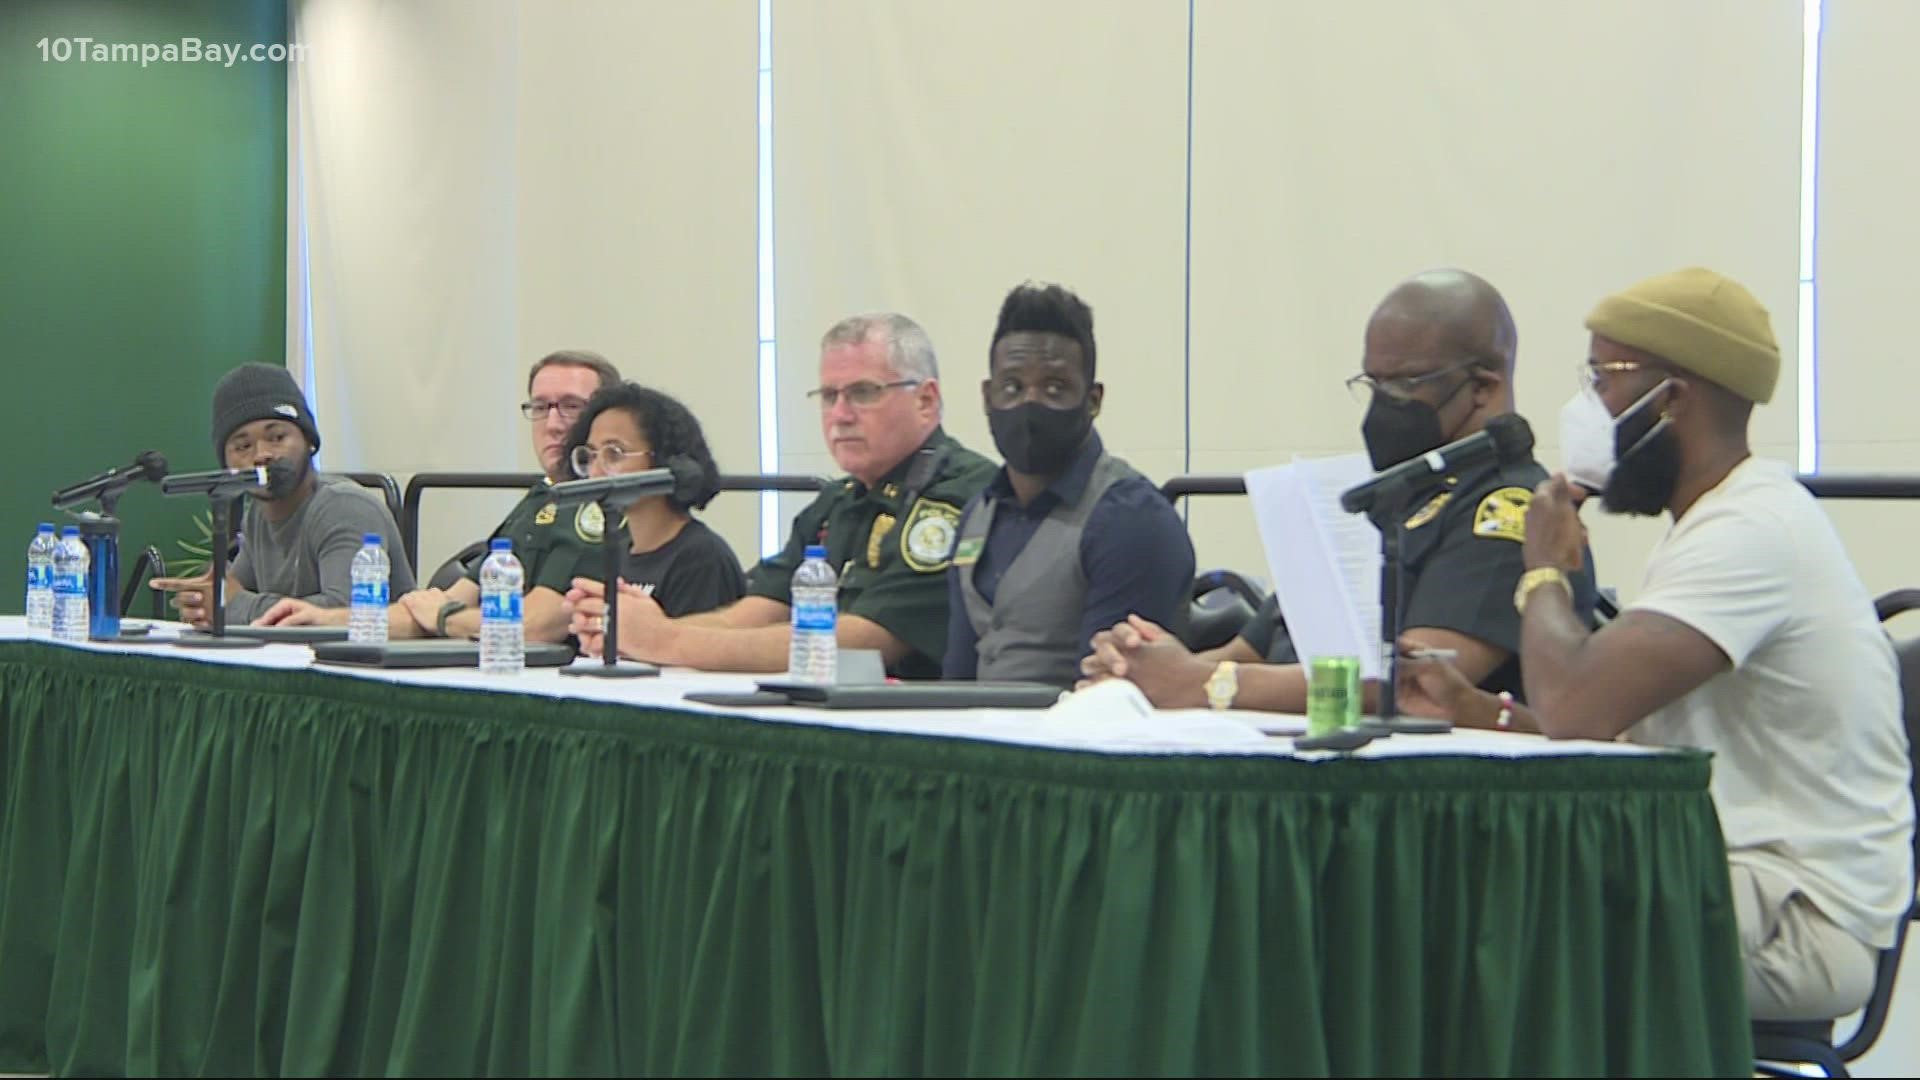 The two groups delved into issues of race and law enforcement.